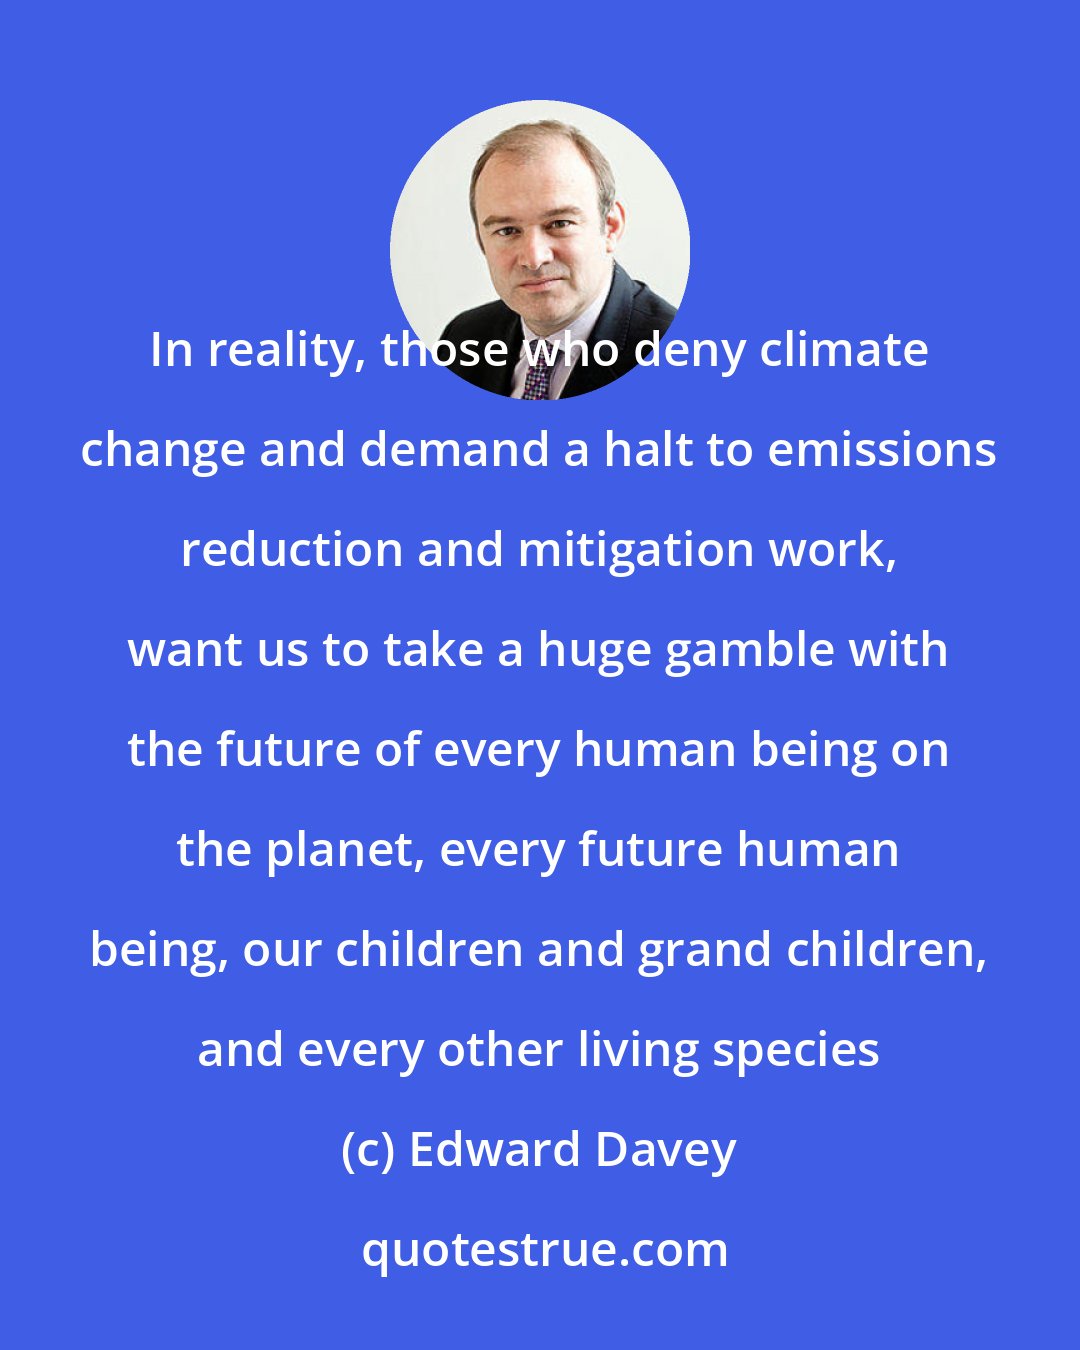 Edward Davey: In reality, those who deny climate change and demand a halt to emissions reduction and mitigation work, want us to take a huge gamble with the future of every human being on the planet, every future human being, our children and grand children, and every other living species